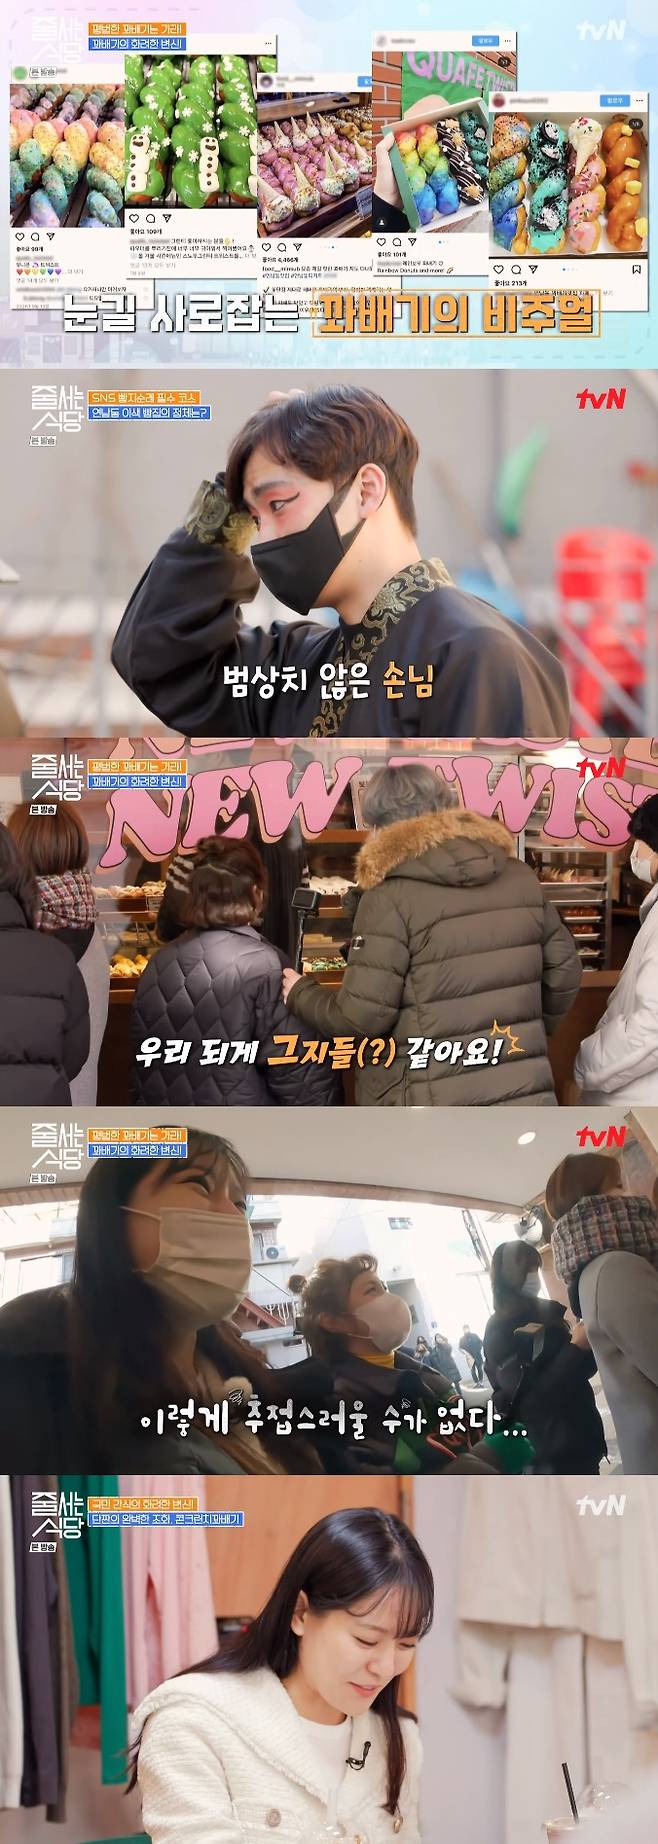 In the TVN entertainment program a lined restaurant broadcasted on the 14th, comedian Park Na-rae, Mukbang YouTuber short-short sun, and Chinese chef Park Eun-young came out as taste verification team.On this day, the Taste Testing Team found a ventilation shop located in an alley deep in Yeonnam-dong.A man with unusual makeup caught the attention of a taste verification team. The man, who works in a nearby store, said he came to buy a exhaust when he broke time.Asked by Park Na-rae, Do you know that, too, the man replied, Yes, I like it so much.Asked if he was ashamed of his brilliant makeup, the man laughed, saying, I am not so ashamed and I am moderately ashamed.I thought I was early, but the line is too long, he said.The appearance of the taste verification team, which waits, exploded sweet.The short-lipped sun that peeked inside the store was ashamed, saying, We are like them, and Park Eun-young laughed, saying, I can not be so dirty.The taste verification team was also hard on the cold. Park Eun-young complained of suffering, saying, Im going in just before I get my toe cut.After more than 50 minutes of weighting, the Taste Check Team entered the store. They were surprised to calculate. They picked 83,300 won.However, Park Na-rae, who tasted the cone lunch, admired: I smell like narcotic corn, he said, I am so envious.It was delicious enough to repurchase. Park Na-rae said, I should have ordered two of these.Park Eun-young also laughed, I have to line up again.The short-lipped sun, which tasted strawberry tiramisu exhaust, was satisfied that It is like a fresh cake, Cream is very good.Park Eun-young also said, There should be strawberries, and admired sweet custard cream goes well with strawberries.The Taste Testing Team gave a general review that it only waits for 3 ~ 40 minutes.Photo = TVN a lined restaurant broadcast capture